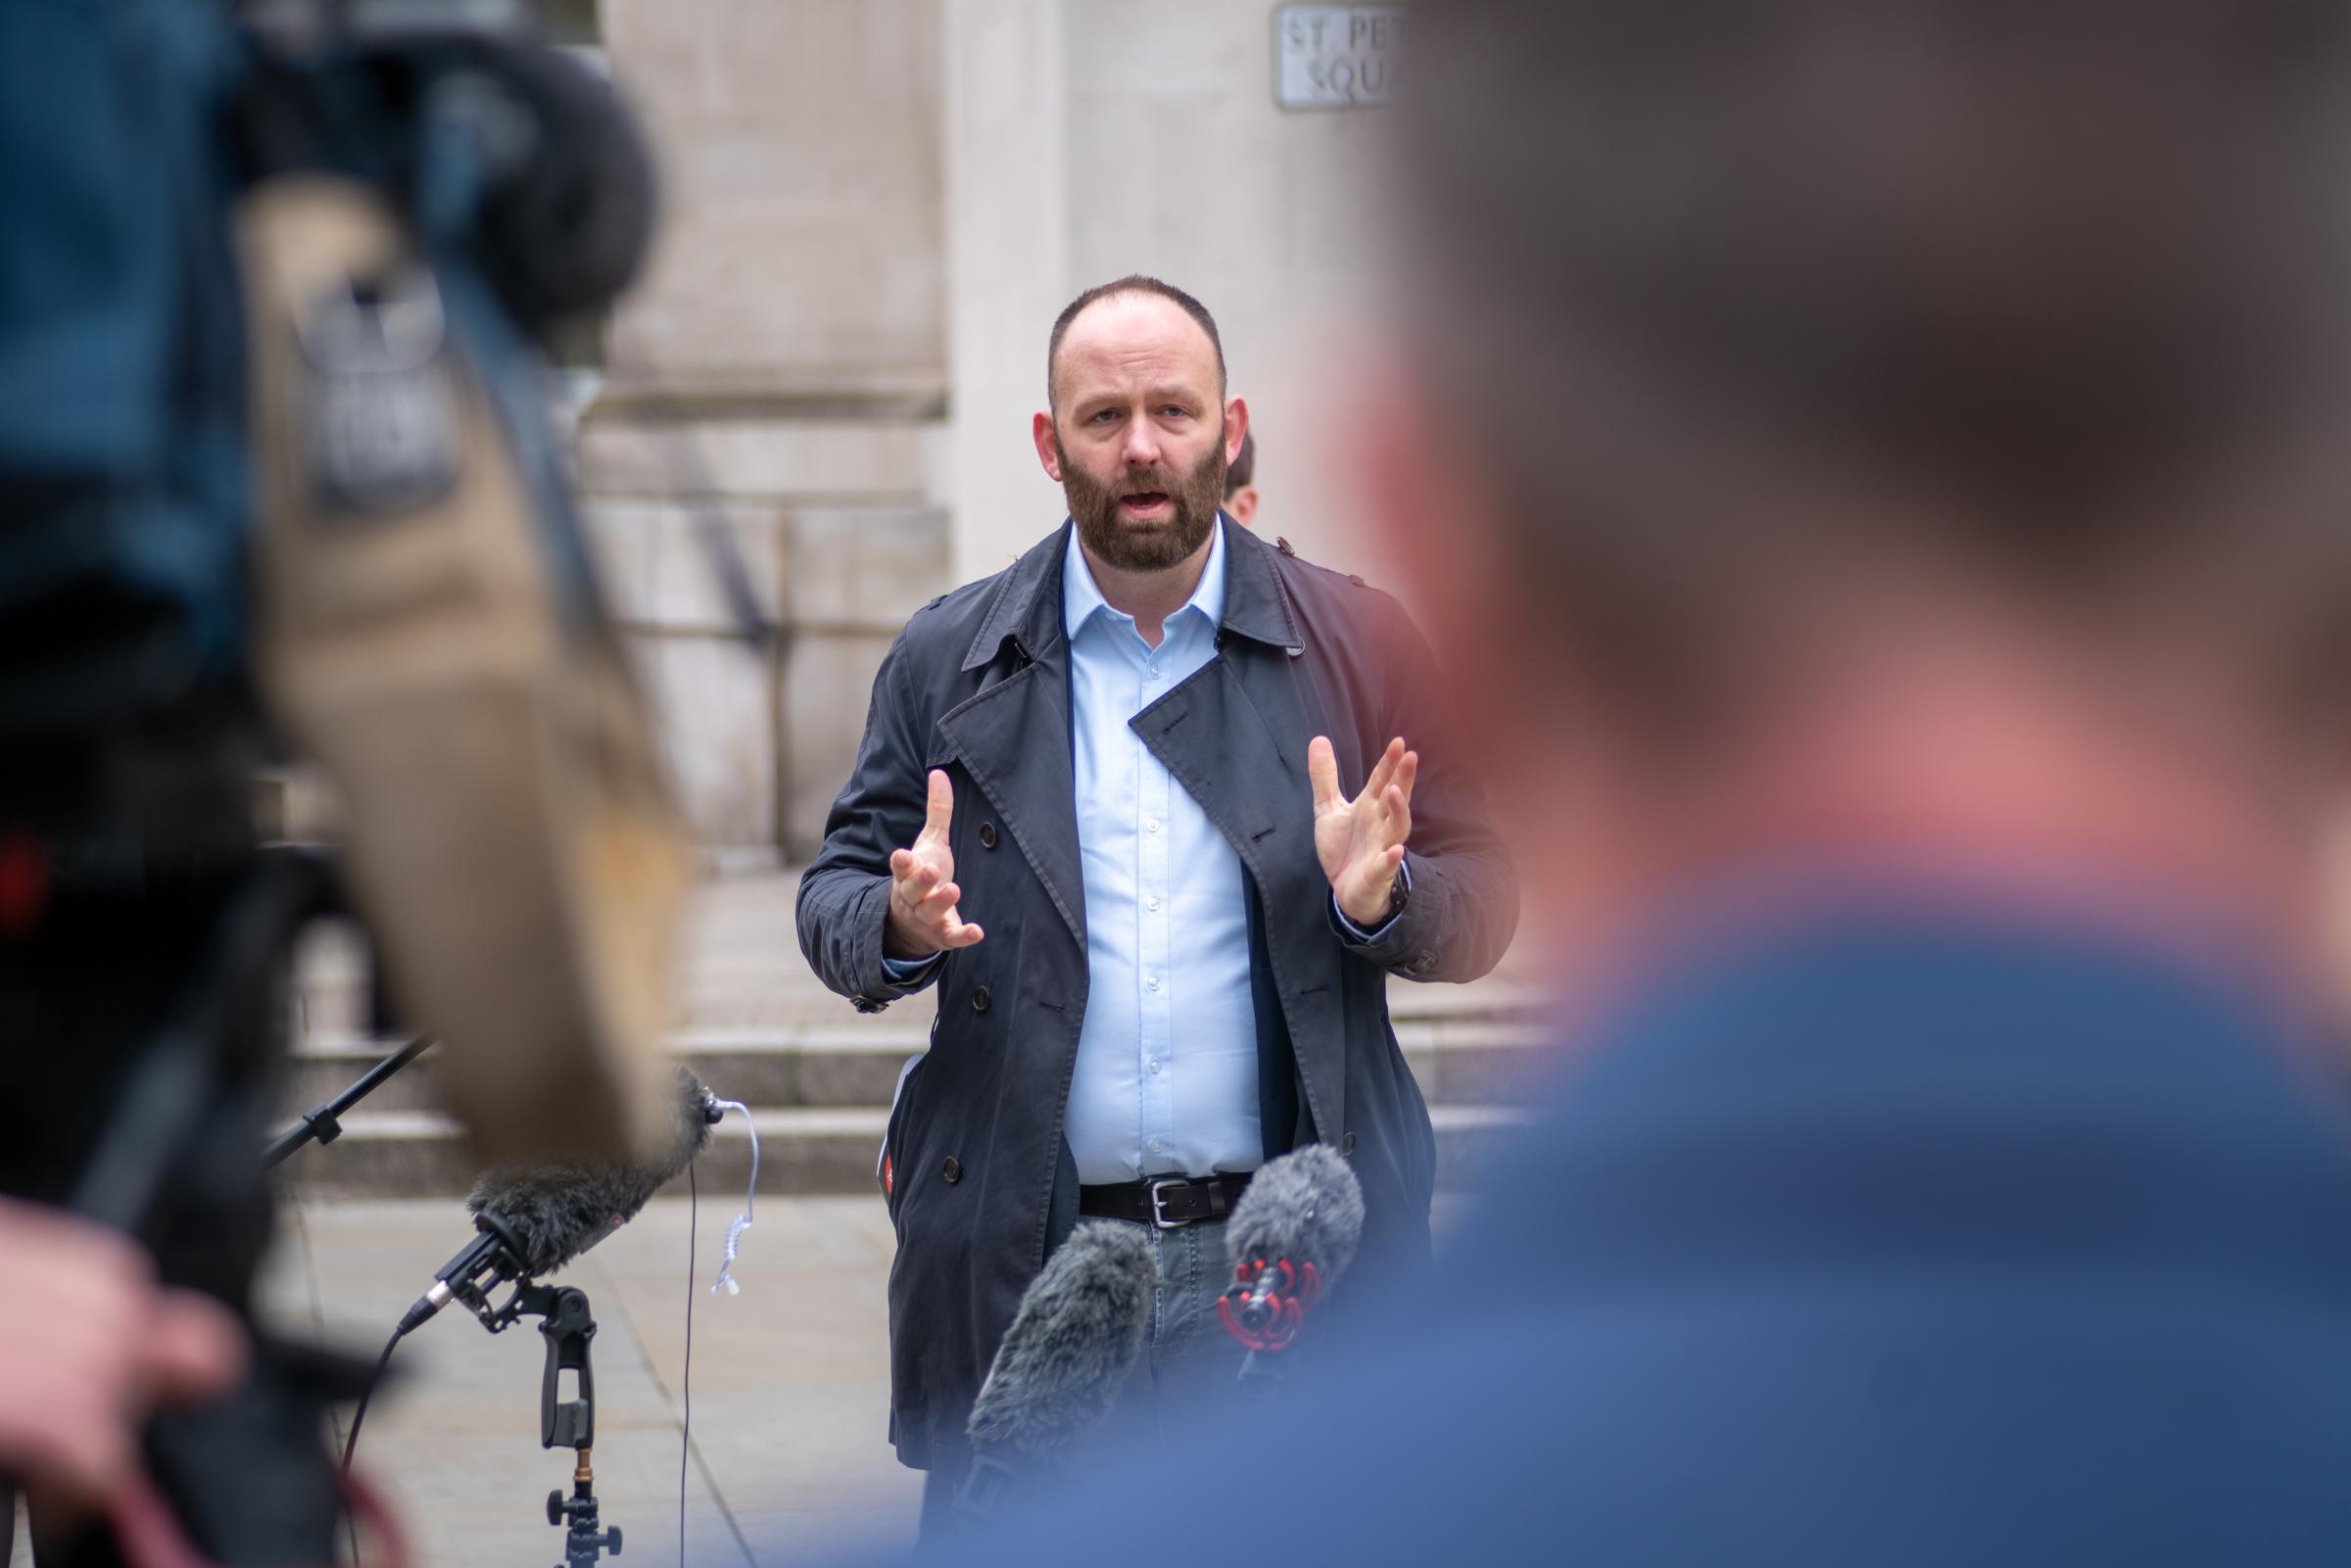 Salford mayor Paul Dennett, GMCA Lead on Housing and Homelessness, at a press conference on May 14, 2021. Credit: GMCA. Caption: Joseph Timan. Permission for reuse for all LDRS partners.